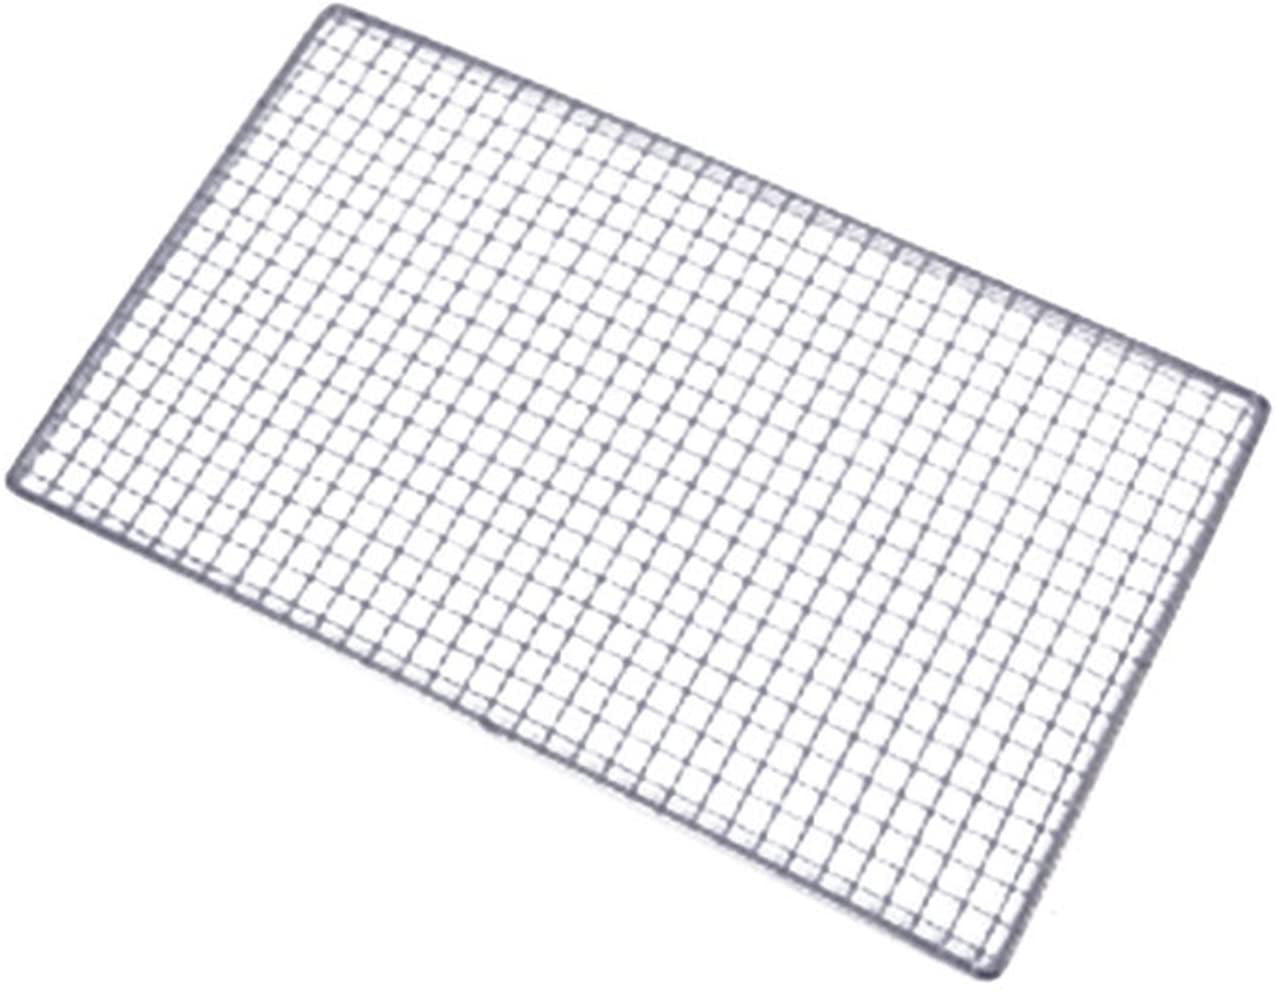 Replacement Net BBQ Stainless Steel Rustproof Cooking Grates for Gas Grills 